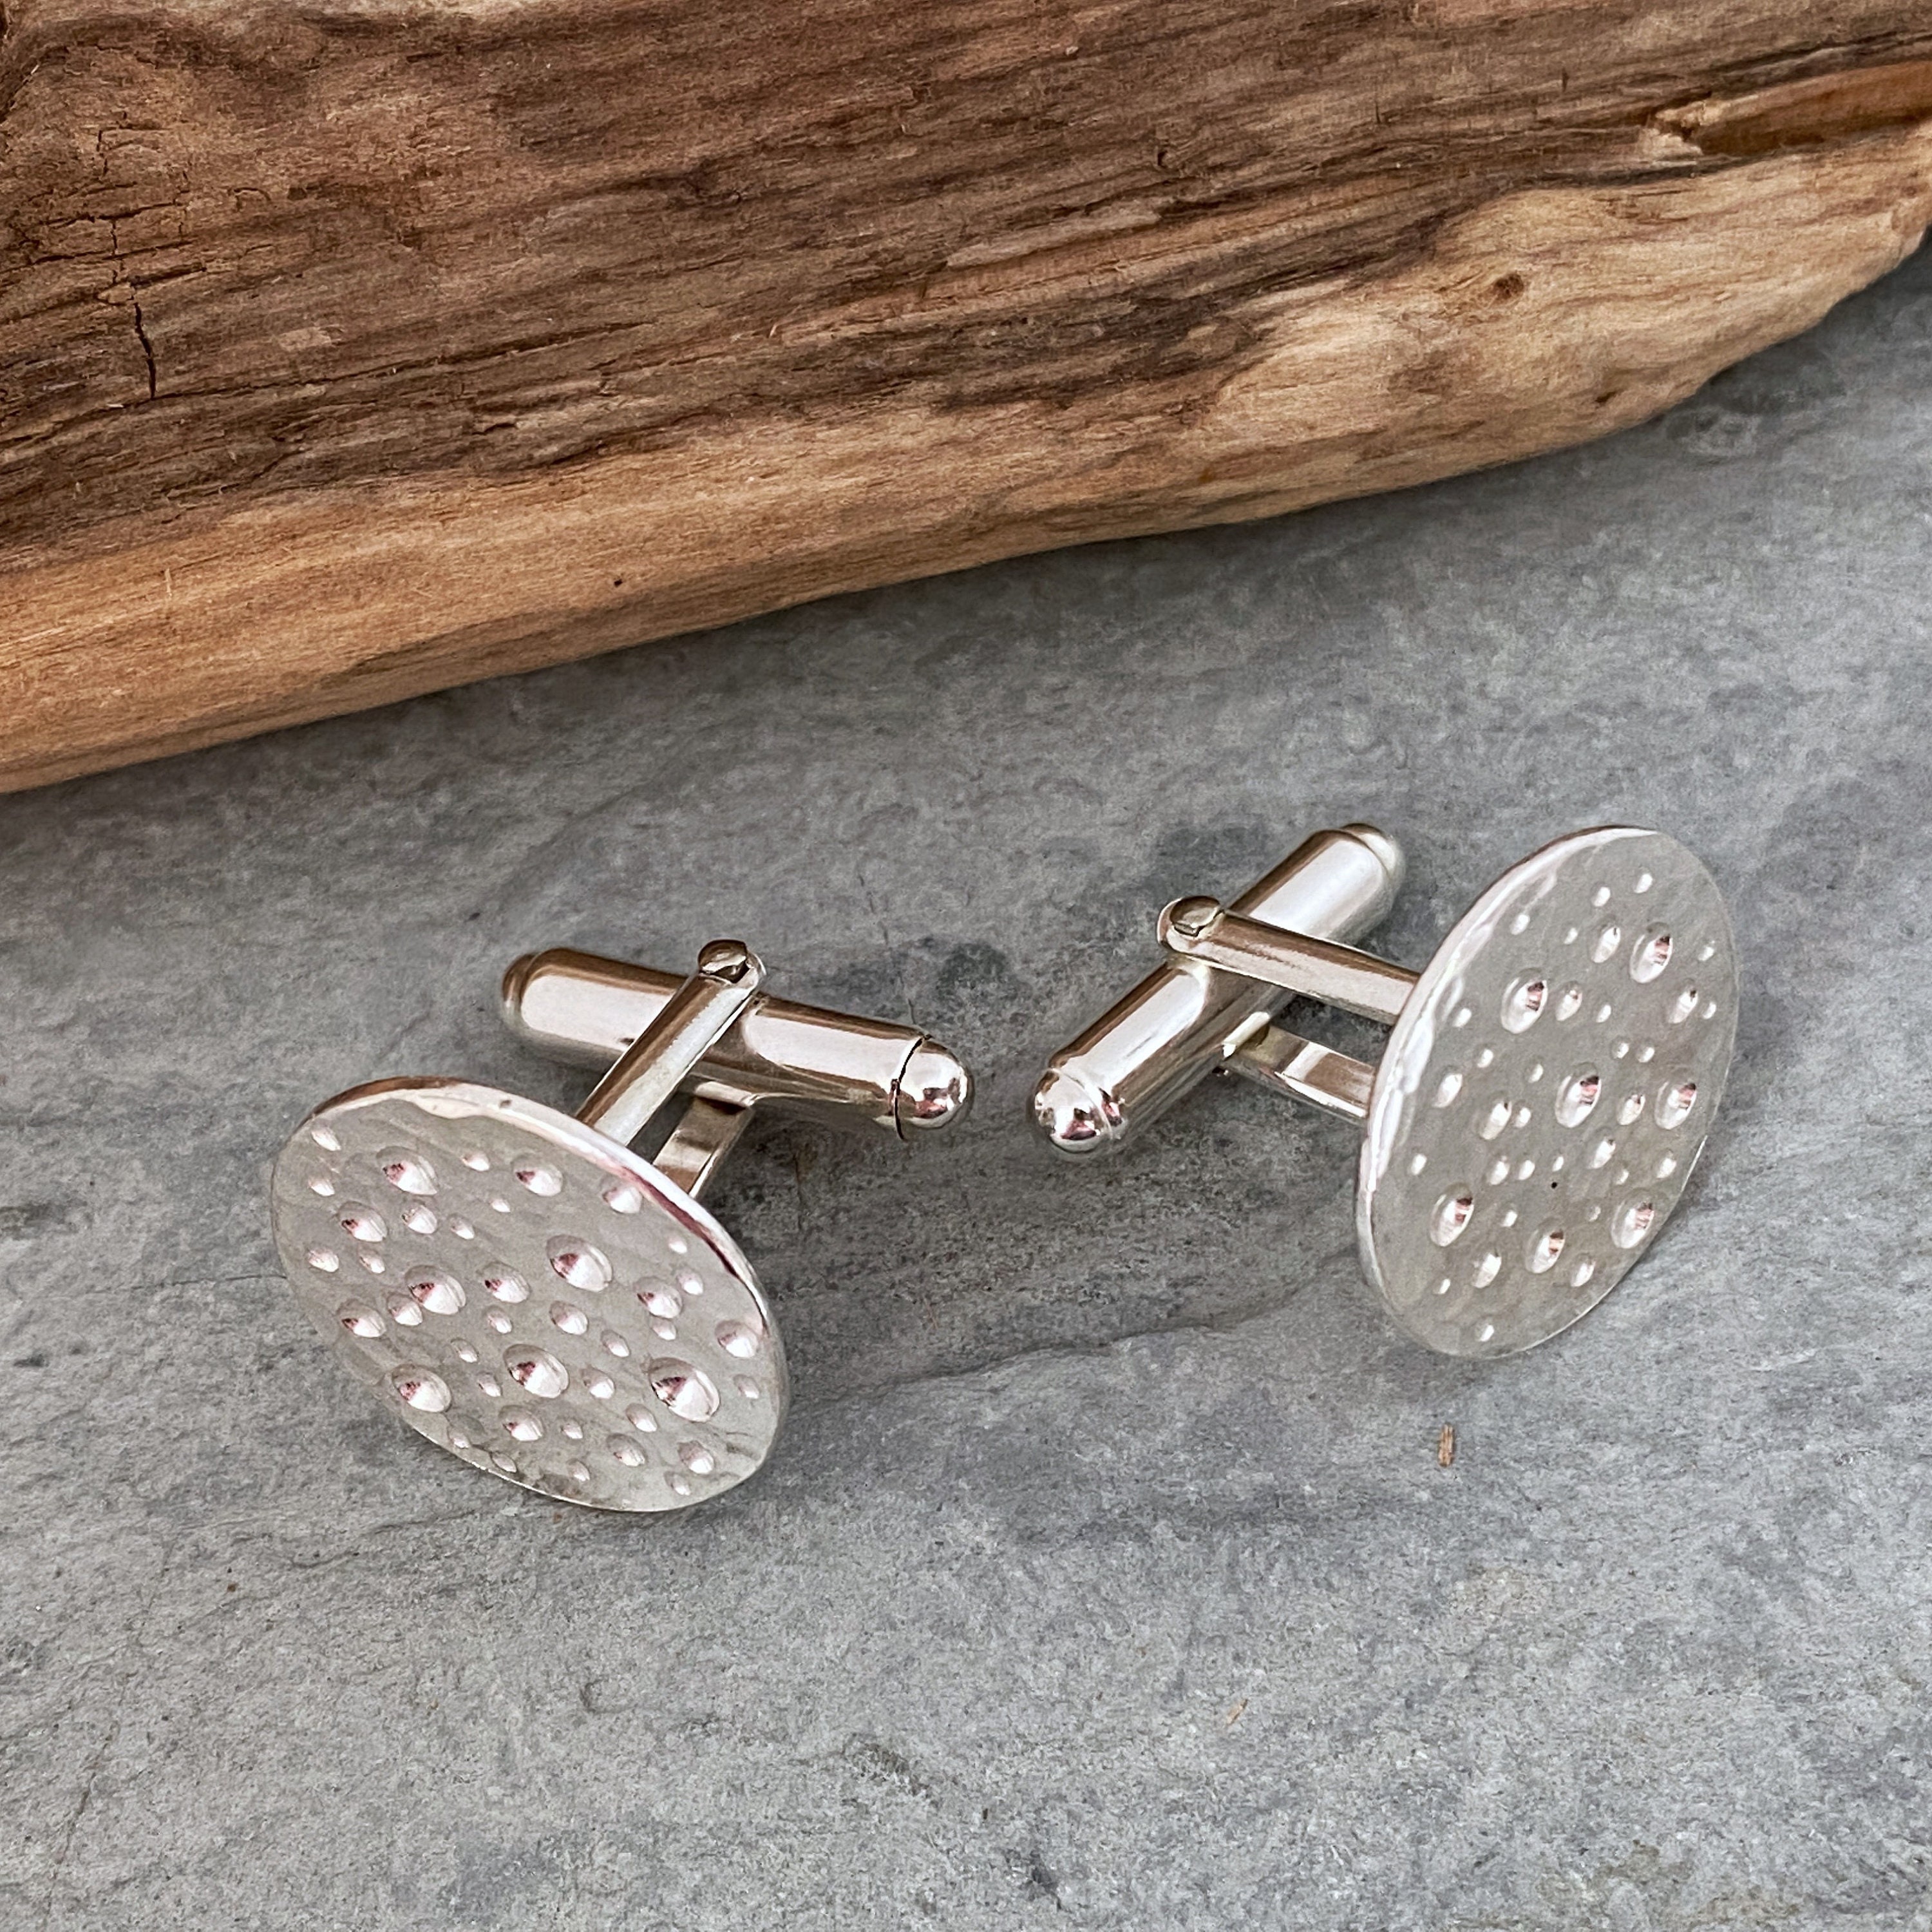 Silver Cuff Links With Hammered Pattern, Sterling Silver Cufflinks, Unique Links, Formal Attire, Mens Accessories, Solid